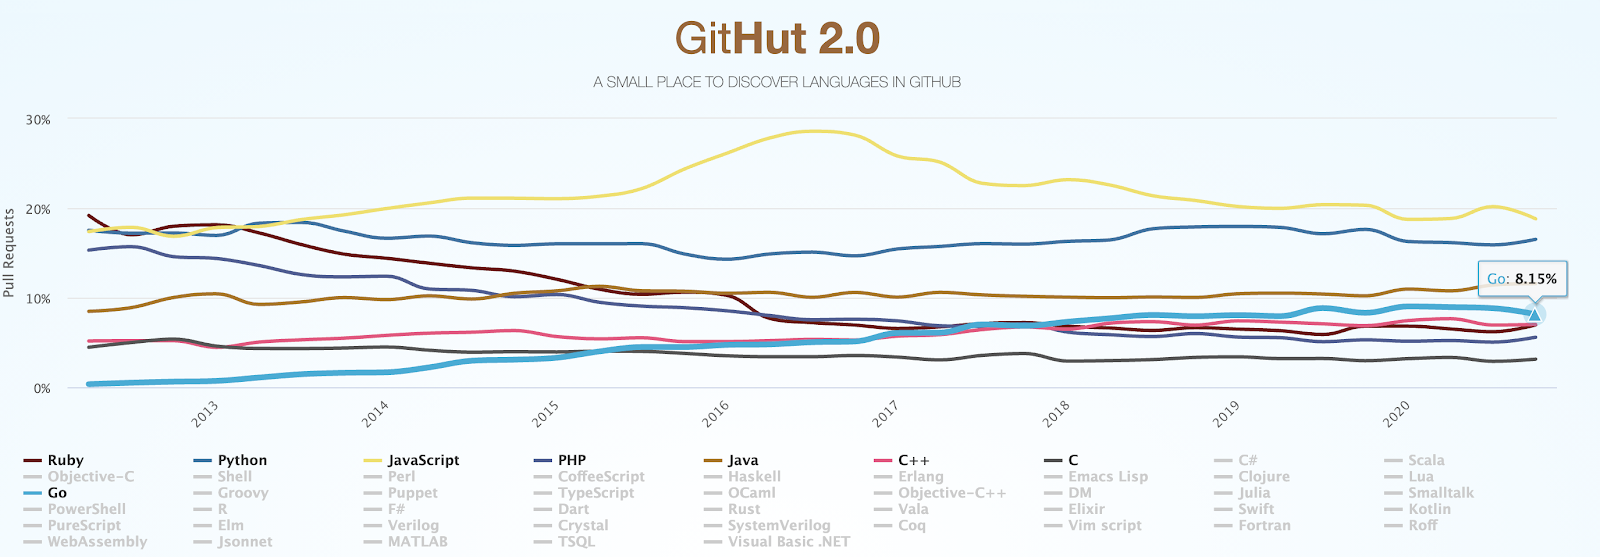 Graph showing popularity of languages on GitHub